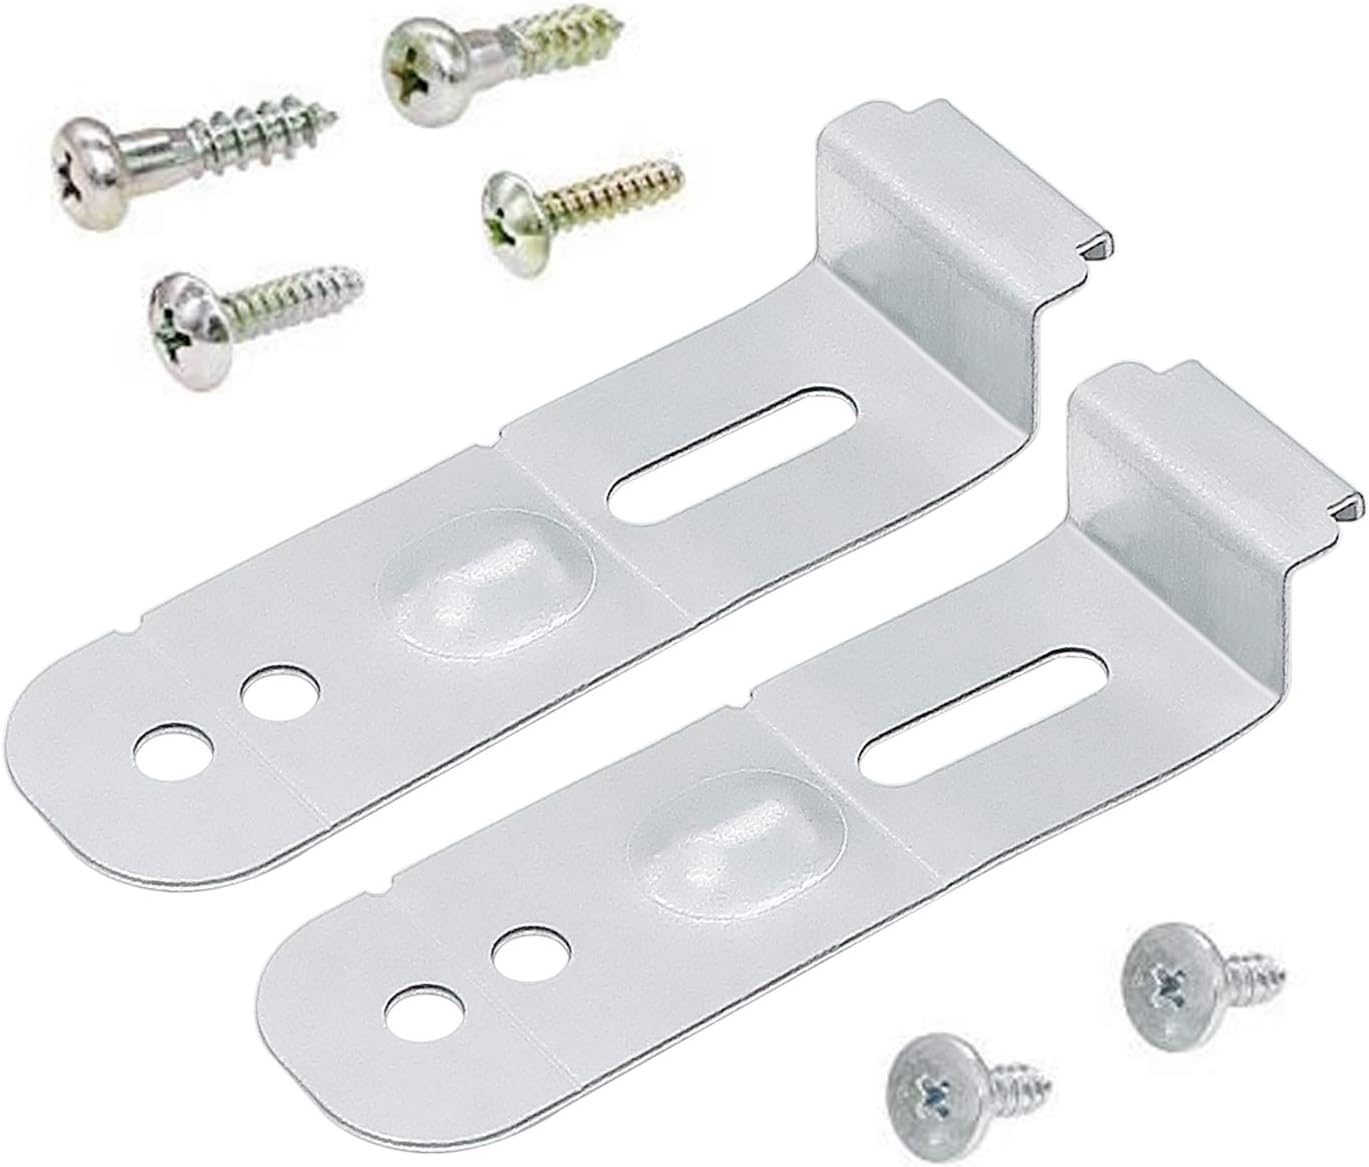 Beaquicy DD94-01002A Assembly-Install Kit - Replacement for Sam-sung Dishwashers - Includes 2 Mounting Brackets and Mounting Screws - Re